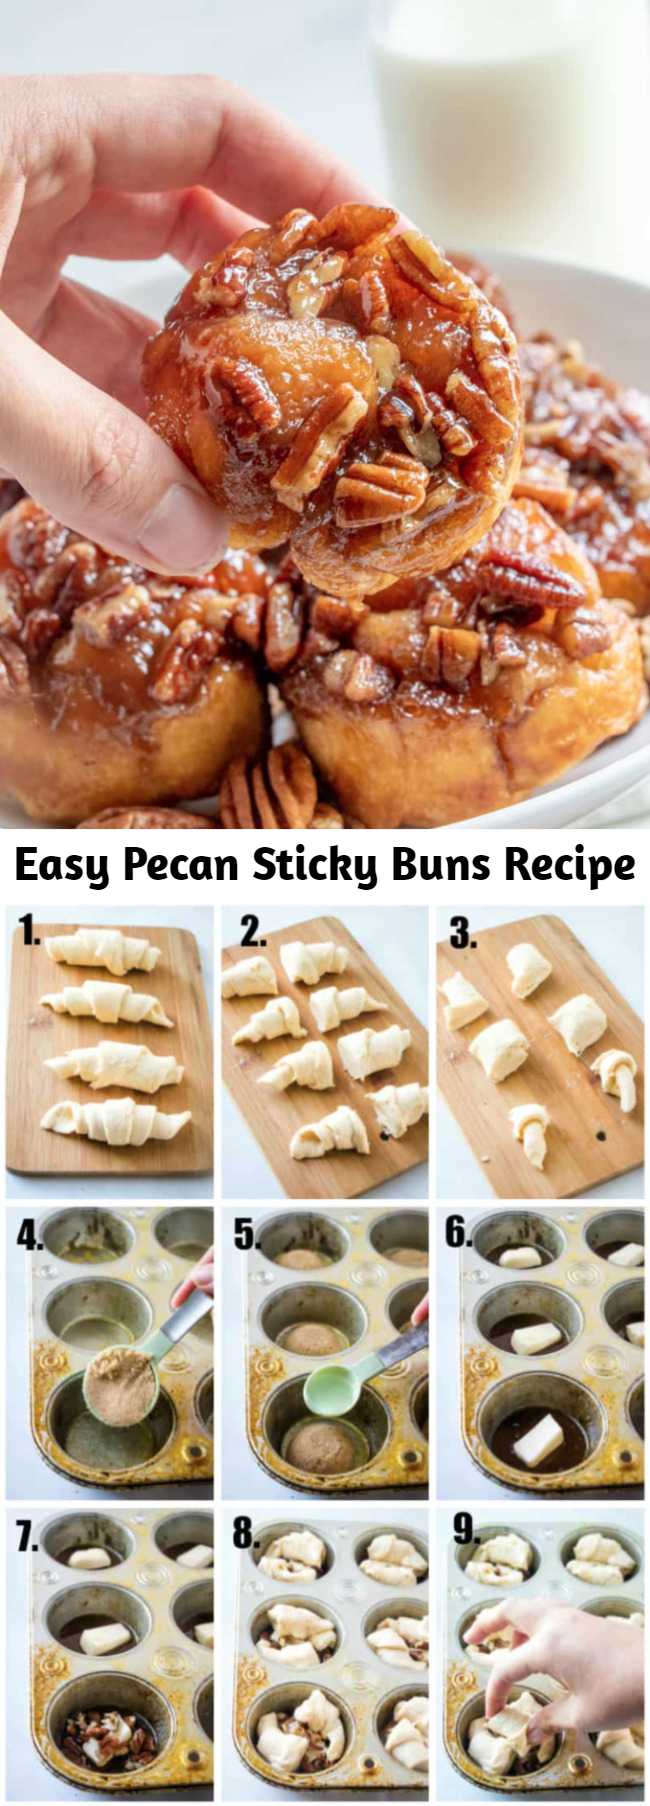 Easy Pecan Sticky Buns Recipe - With only 5 ingredients and 20 minutes these Easy Pecan Sticky Buns are the perfect breakfast or dessert recipe that is gooey, sweet and crunchy all in one. #breakfast #dessert #pecans #breads #recipe #easyrecipe #tasty #yummy